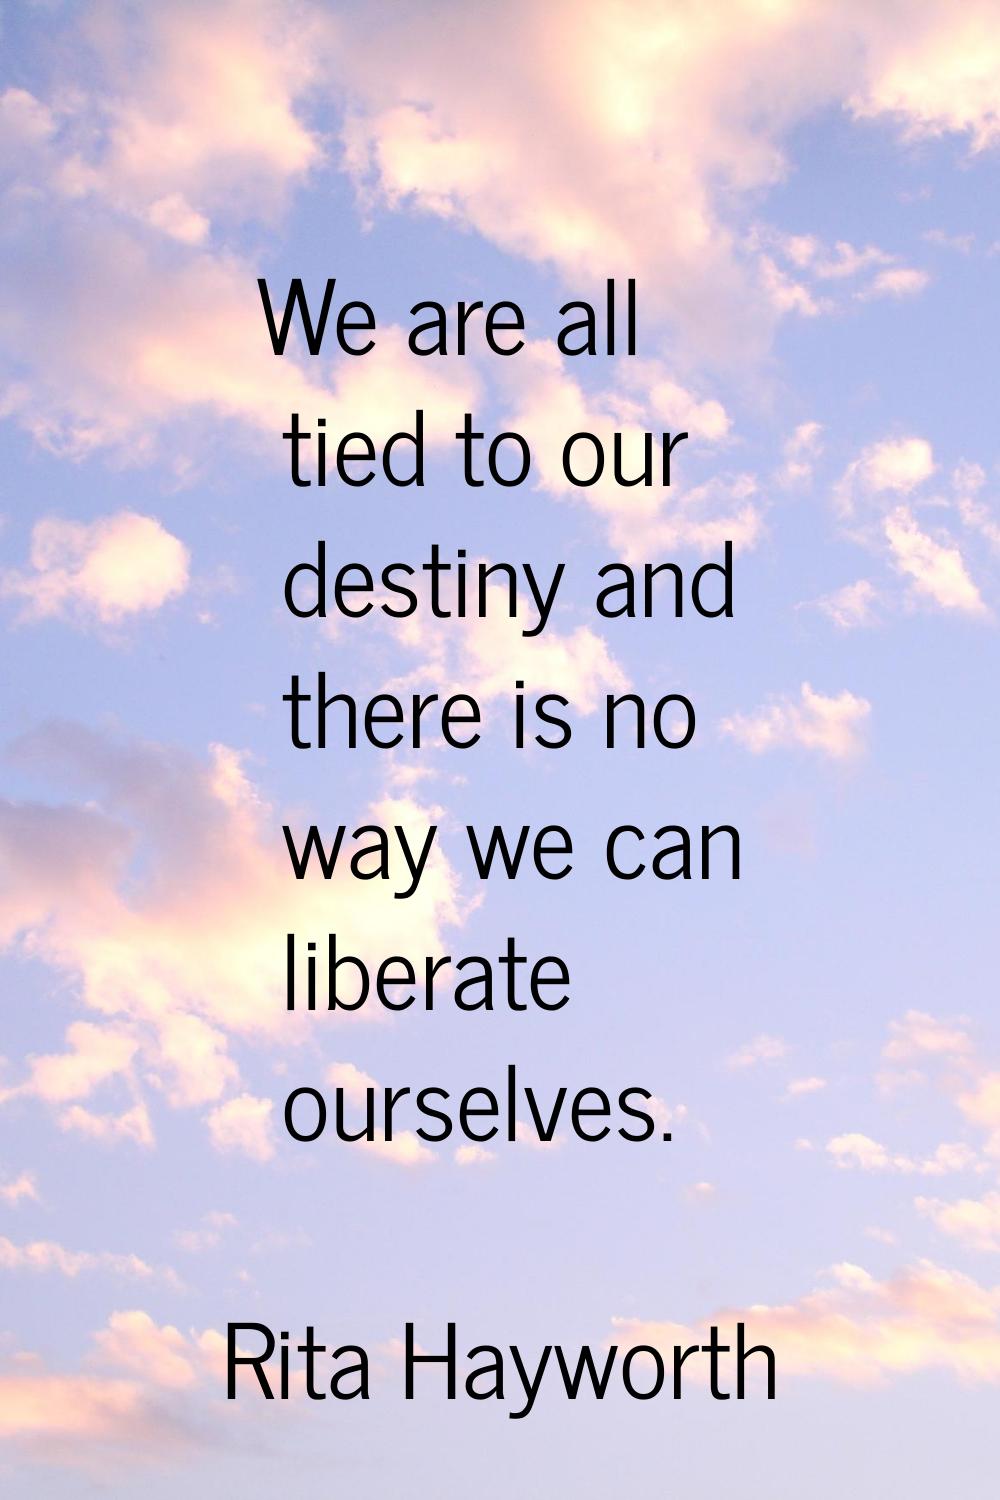 We are all tied to our destiny and there is no way we can liberate ourselves.